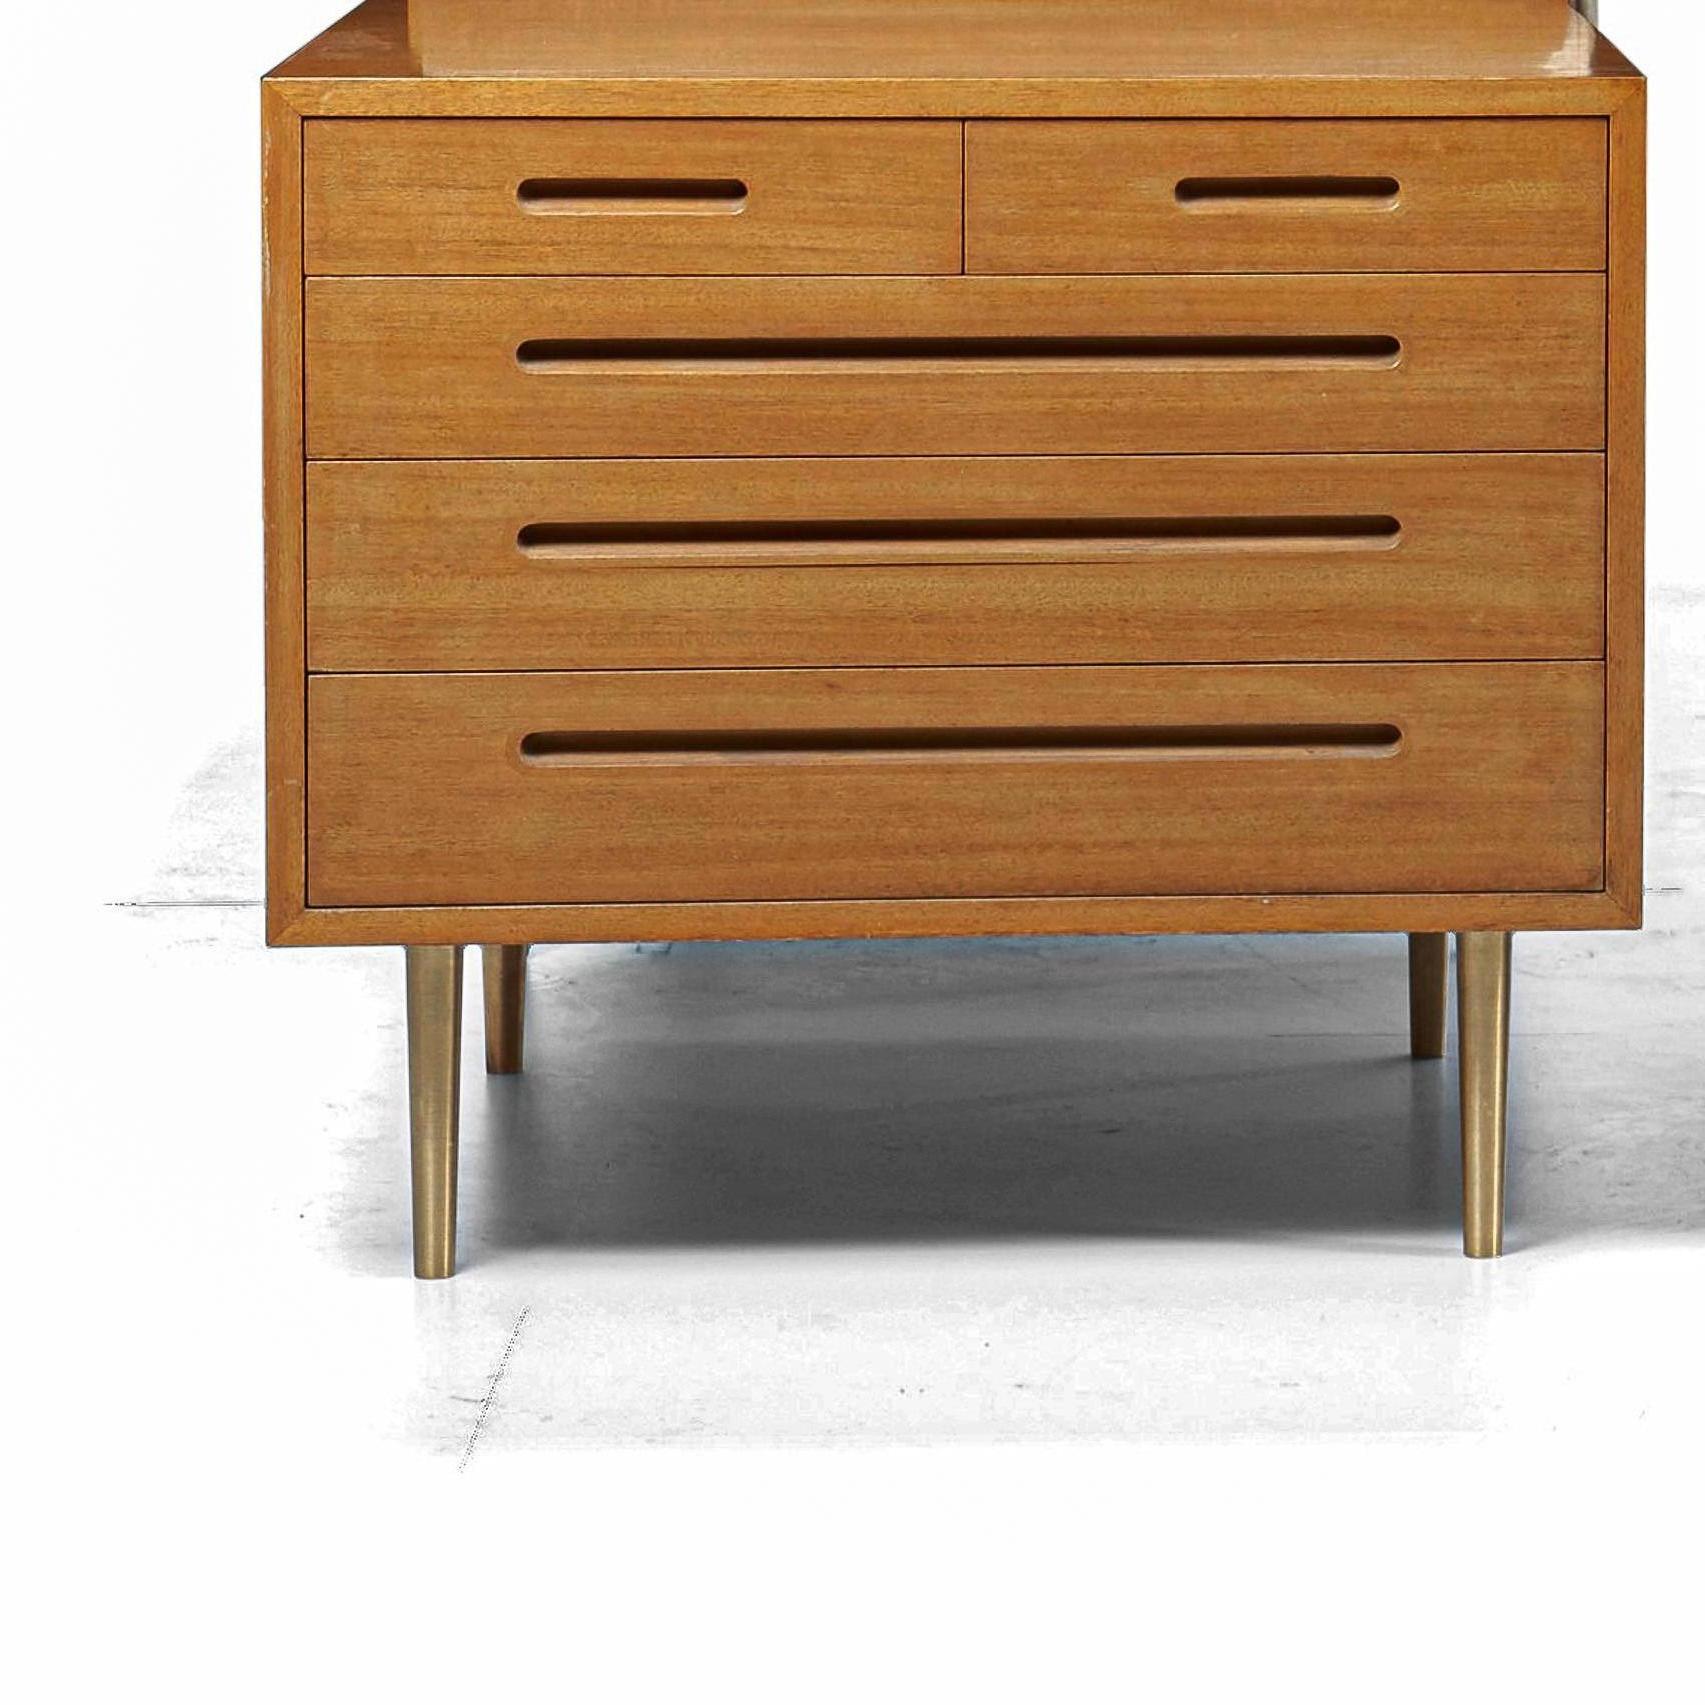 Edward Wormley for Dunbar 5-drawer cabinet, mahogany wood with tapered brass legs.
[metal tag Dunbar].